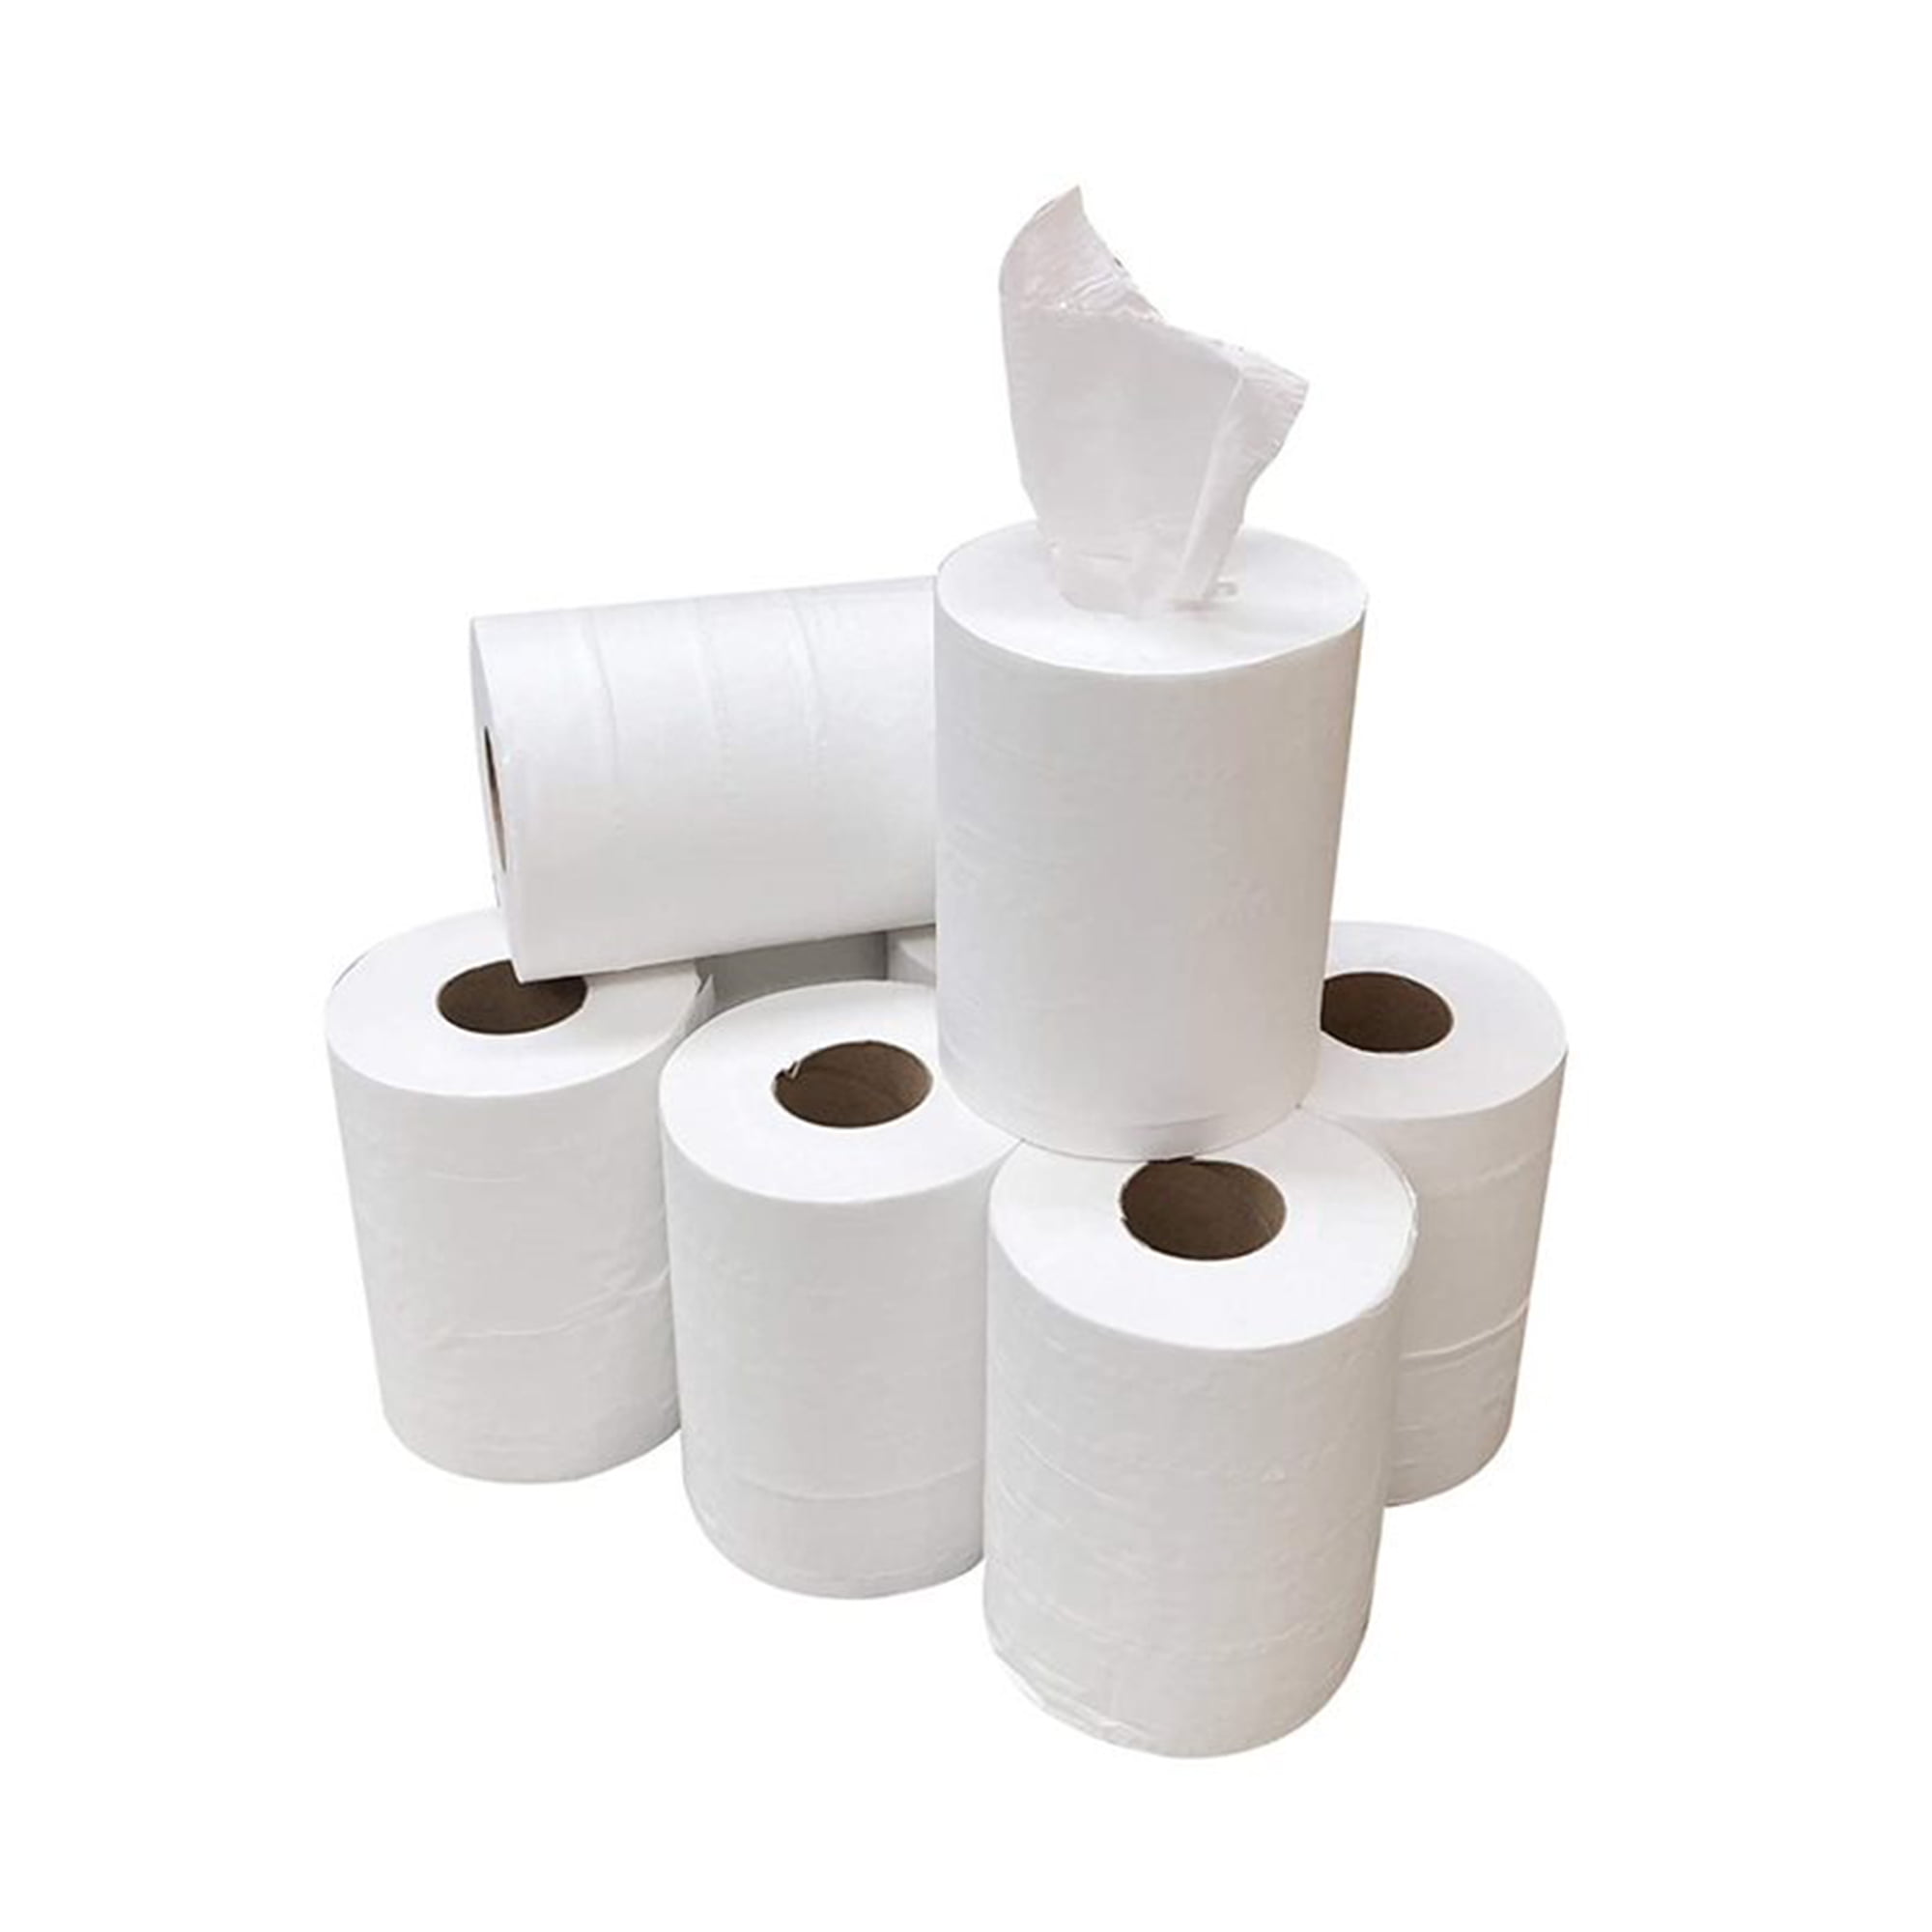 x White Centrefeed Embossed 2ply Wiper Paper Towel 85M 24 rolls 4 PACKS 